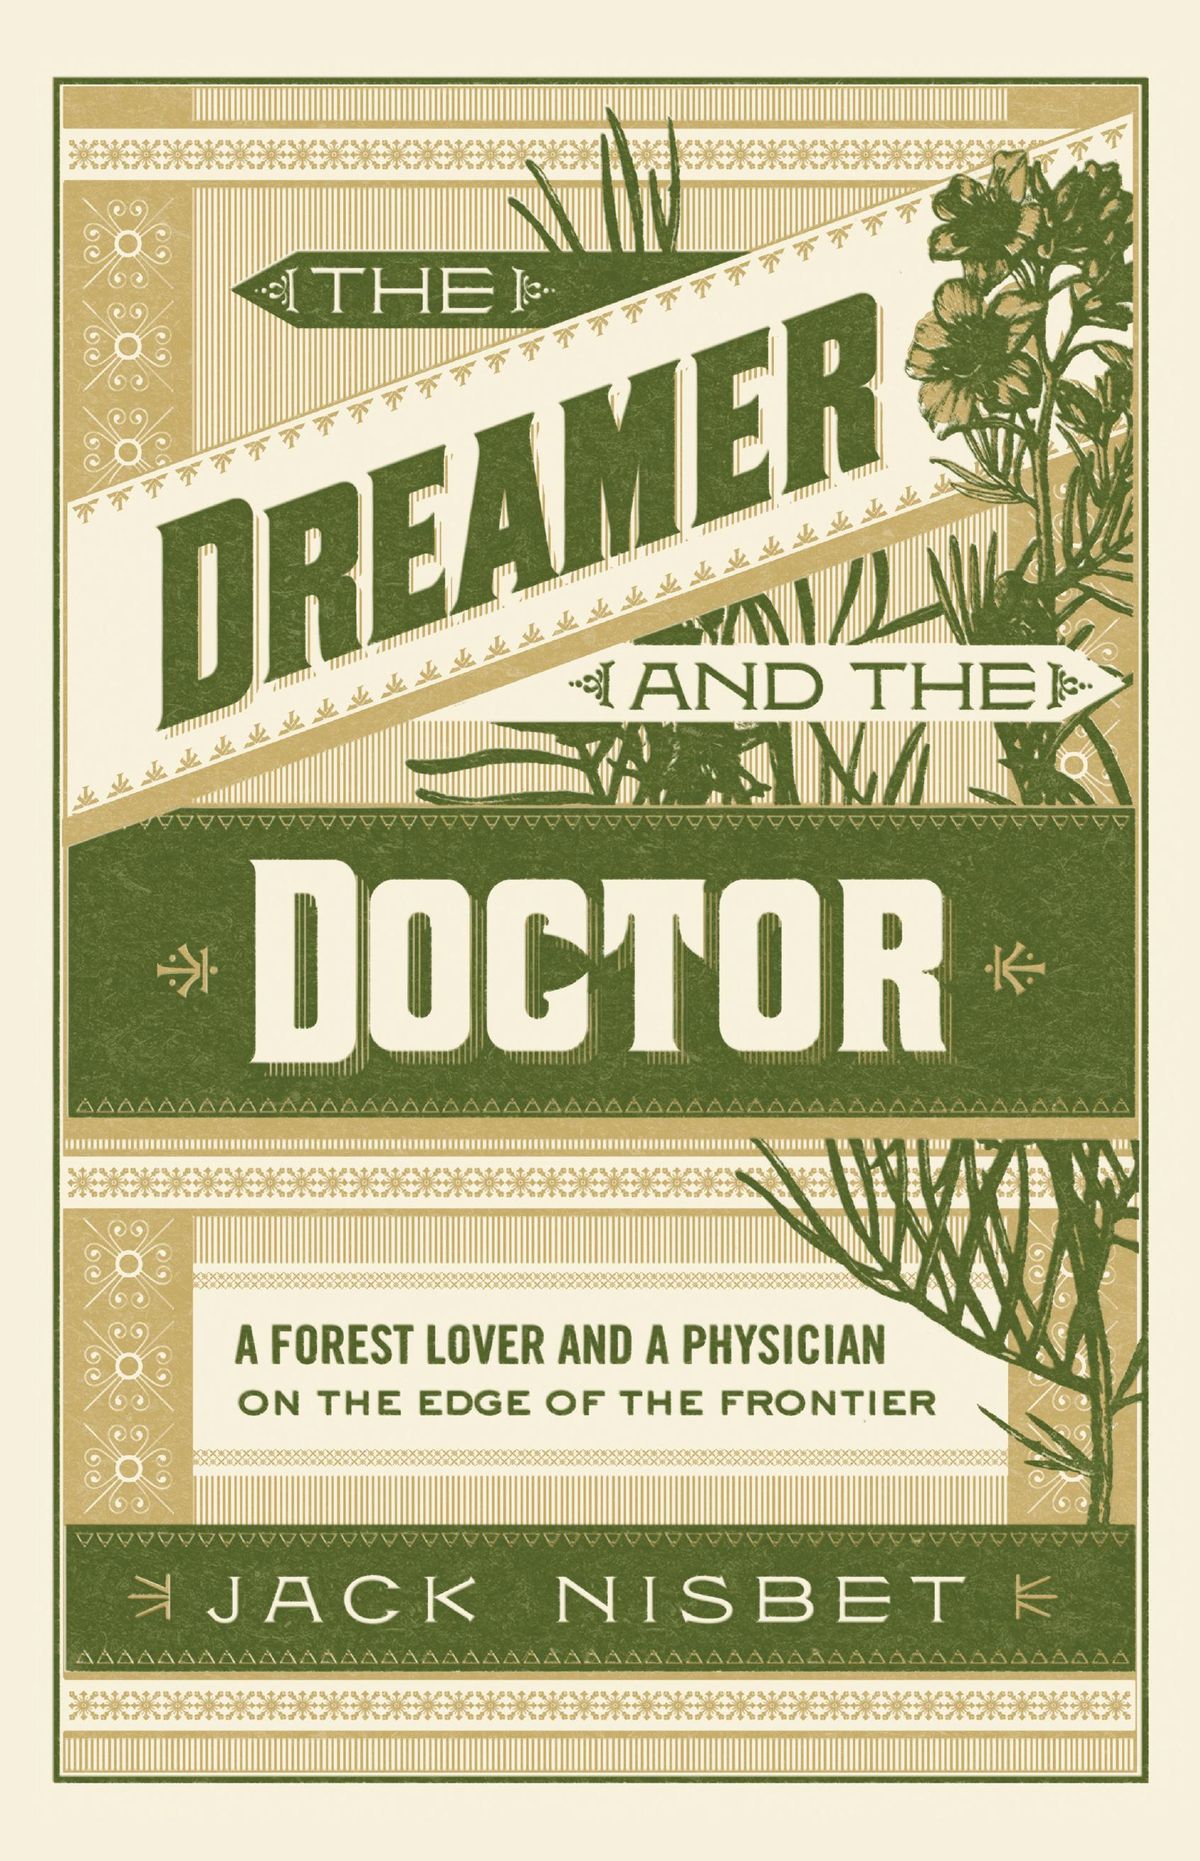 “The Dreamer and the Doctor” by Jack Nisbet, is published by Sasquatch Books.